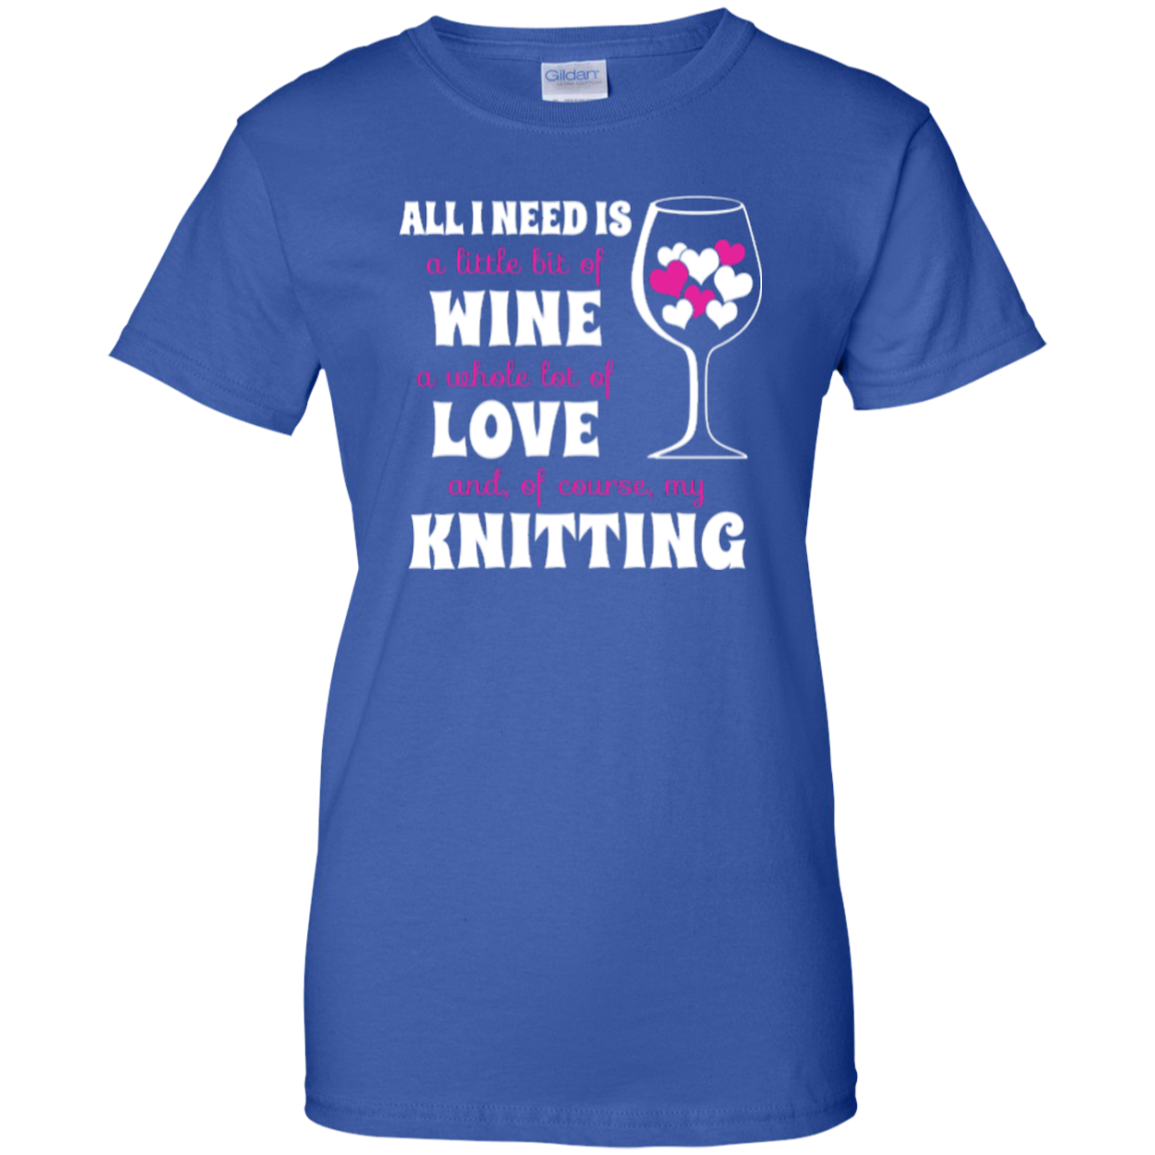 All I Need is Wine-Love-Knitting Ladies Custom 100% Cotton T-Shirt - Crafter4Life - 10